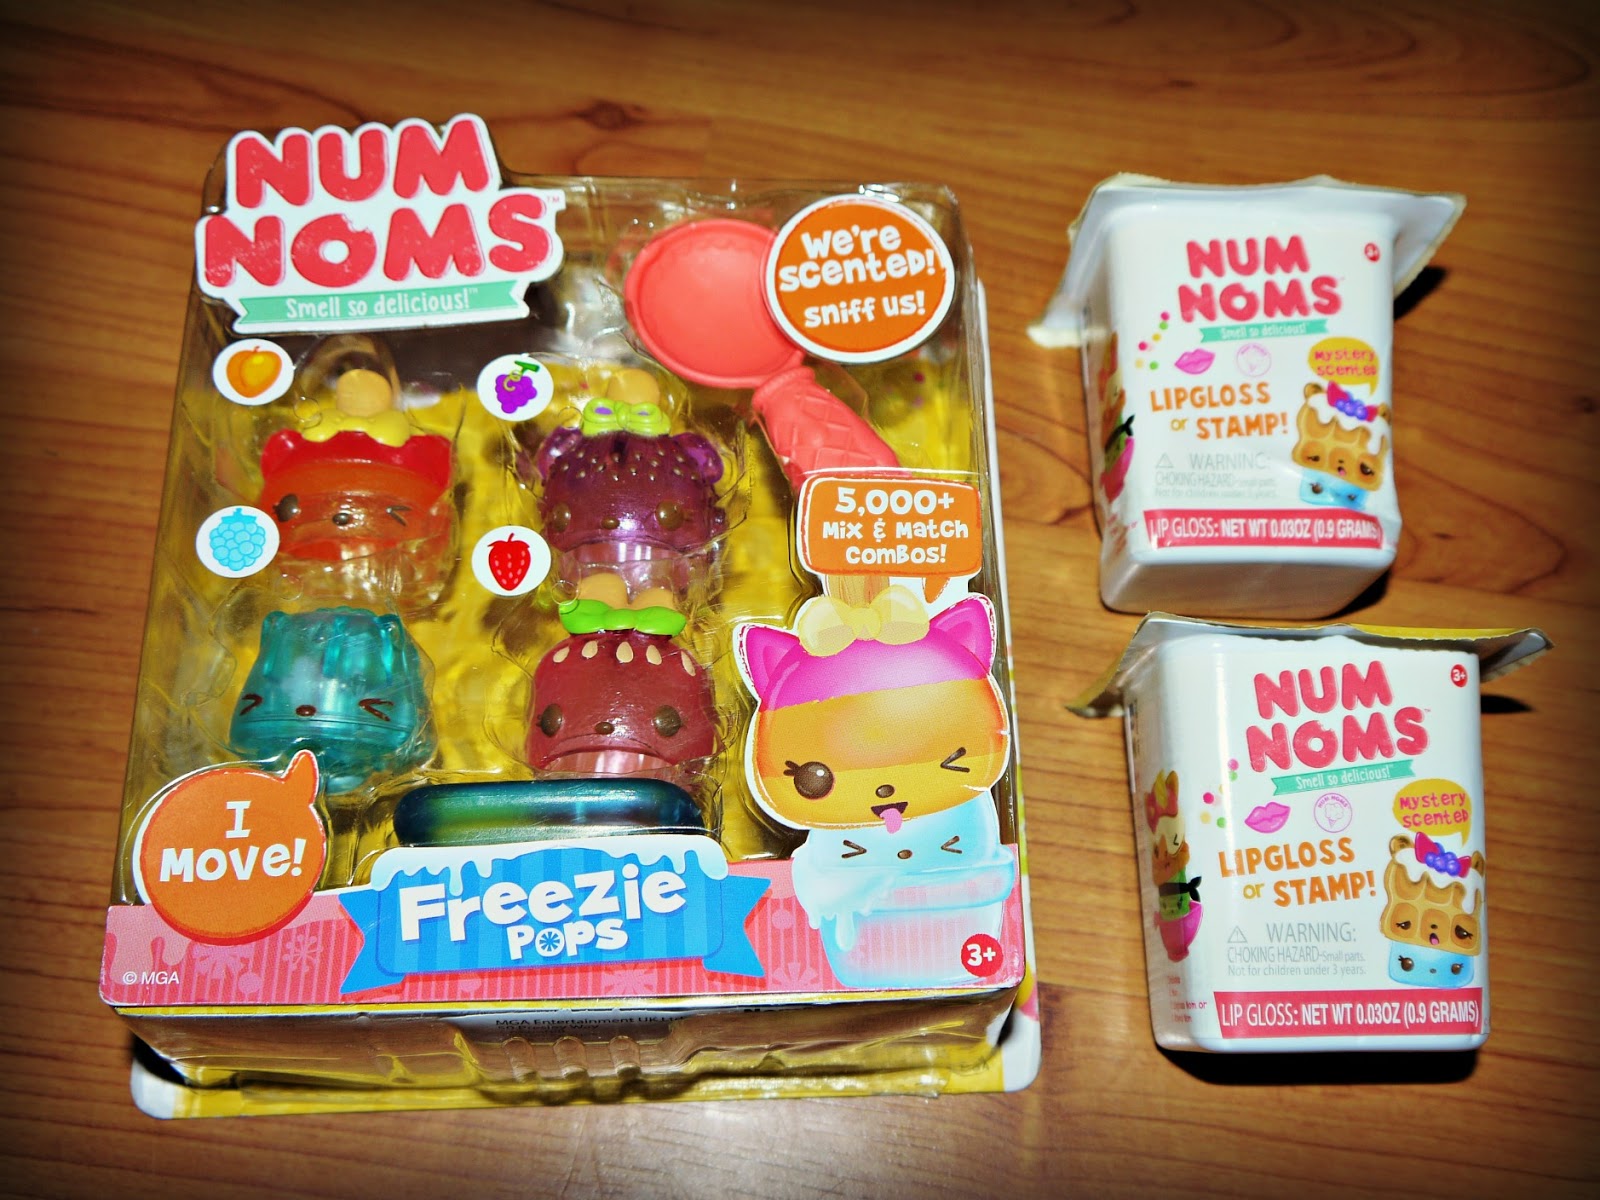 Num Noms Stackable Scented Ice Cream Toys Unboxing BRAND NEW JUST